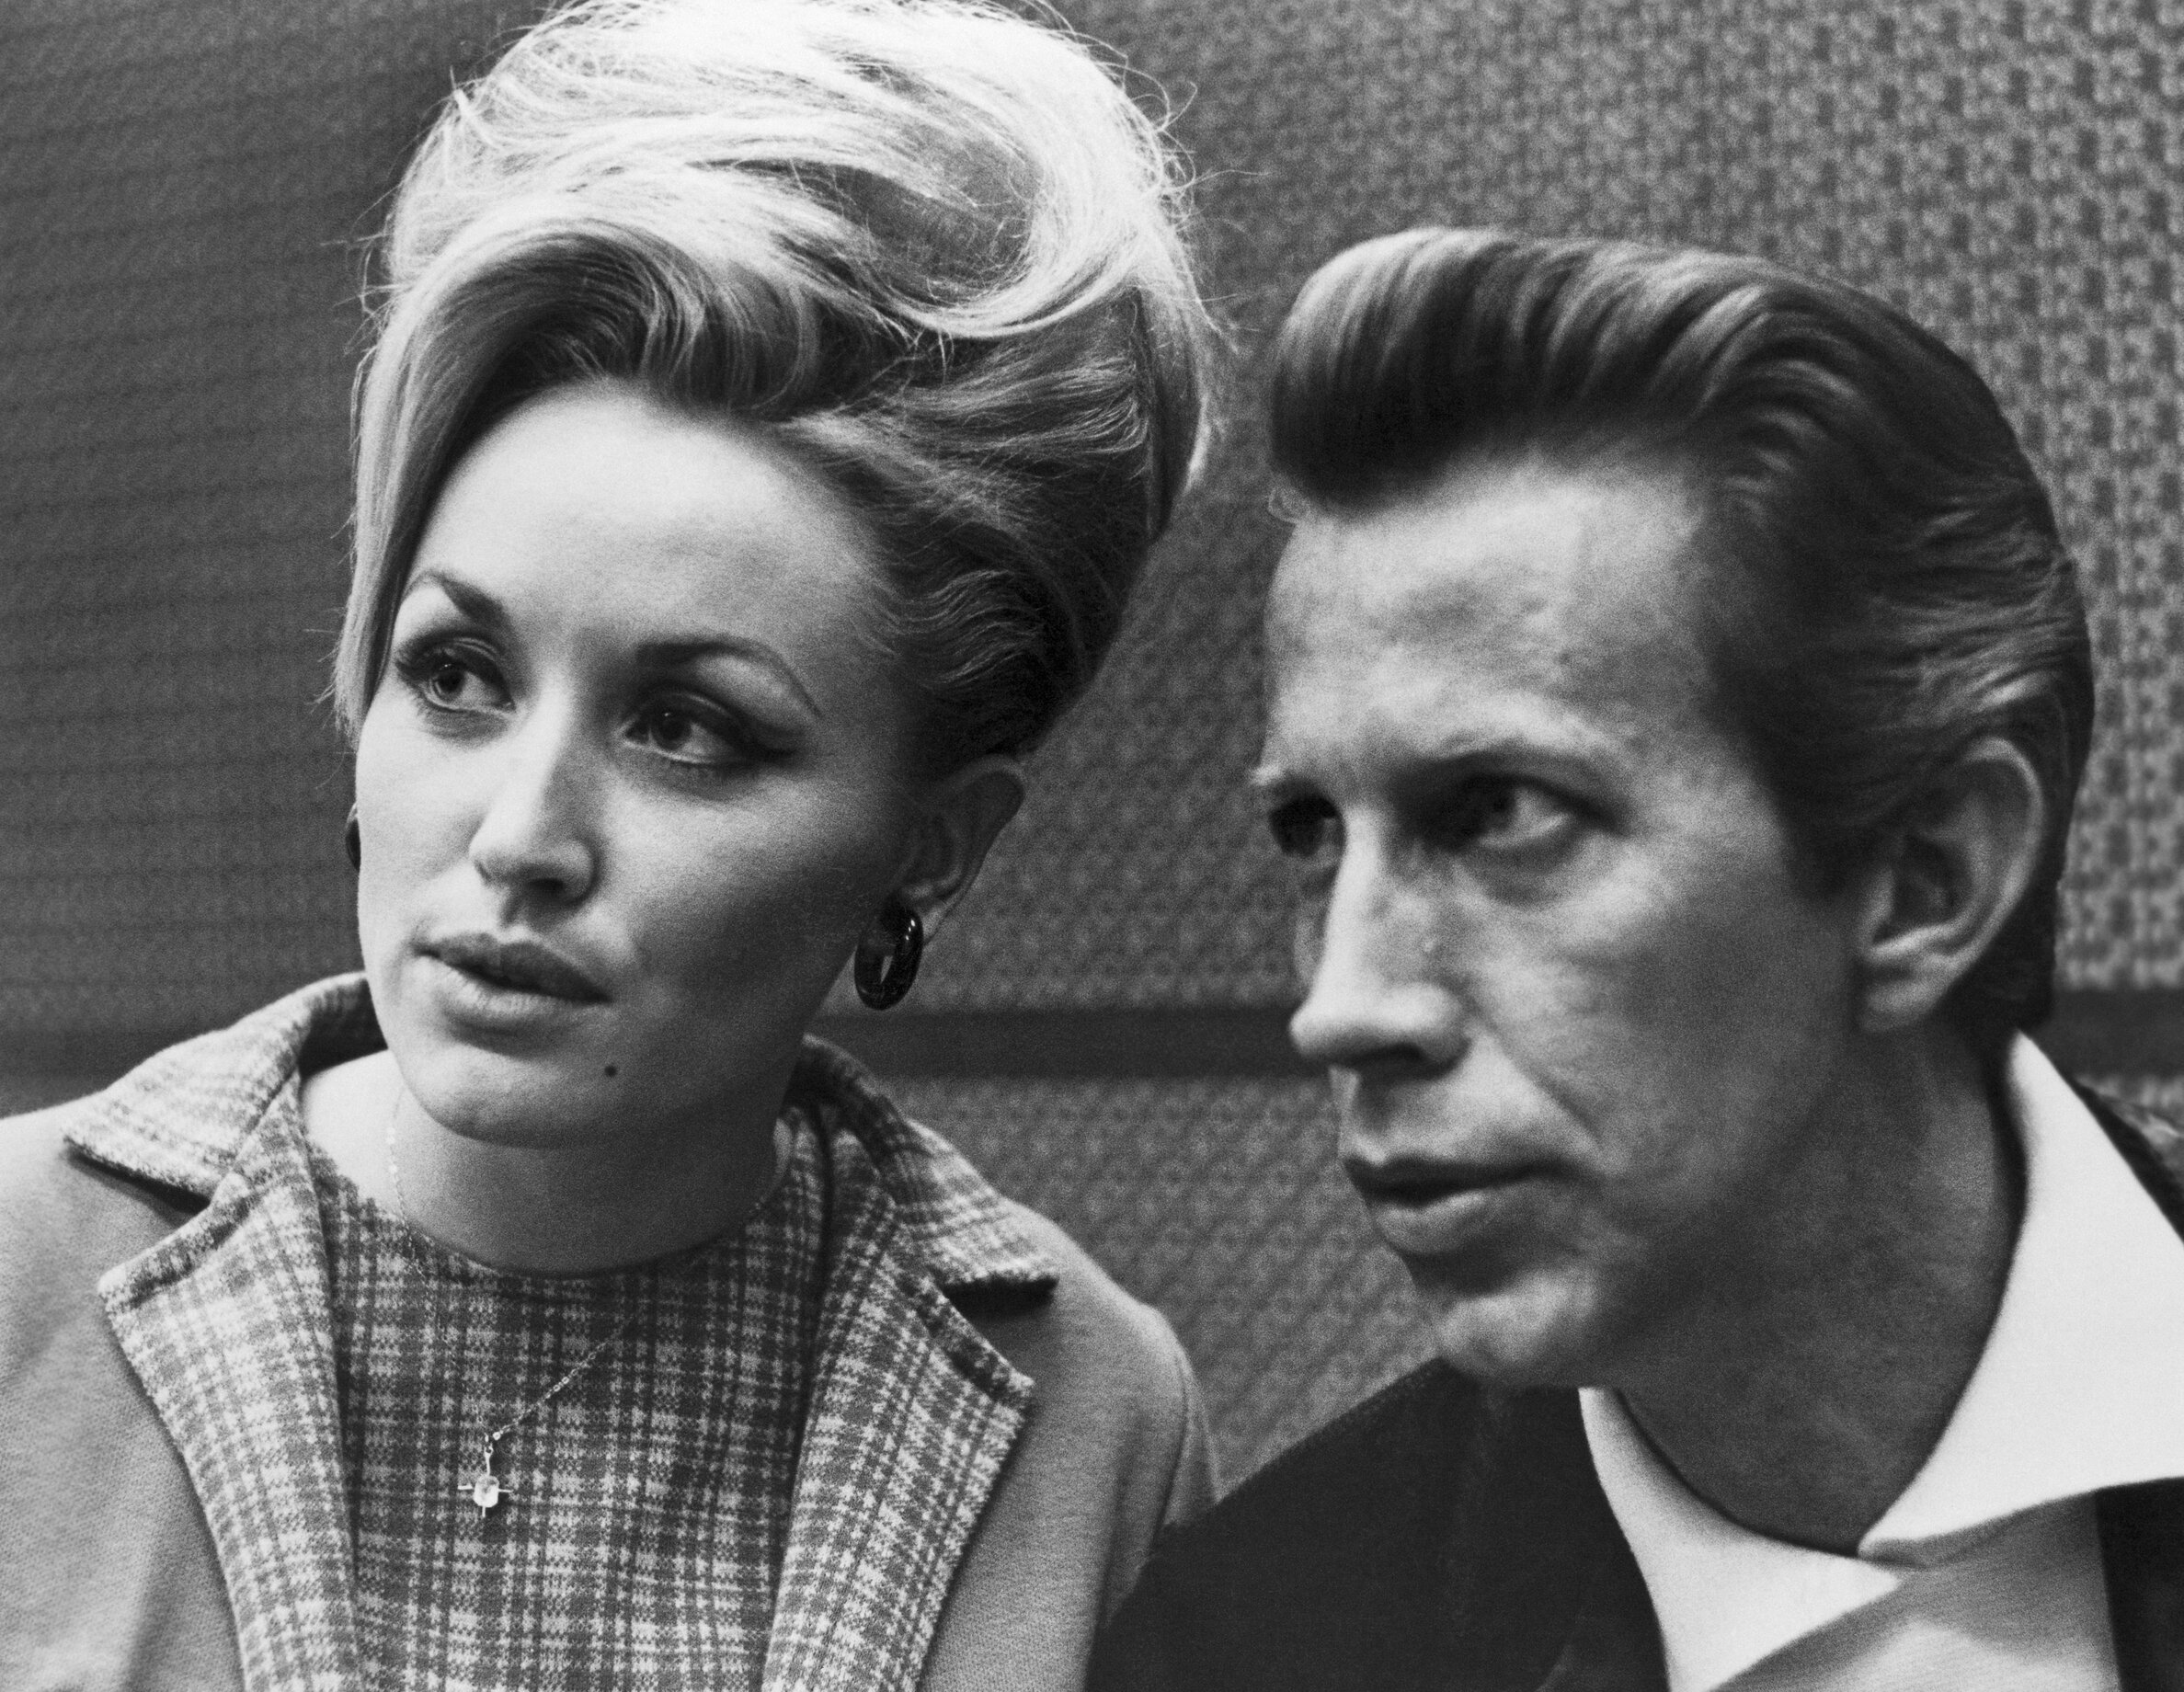 Country singers Dolly Parton and Porter Wagoner in a candid portrait in 1968 in Nashville, Tennessee.